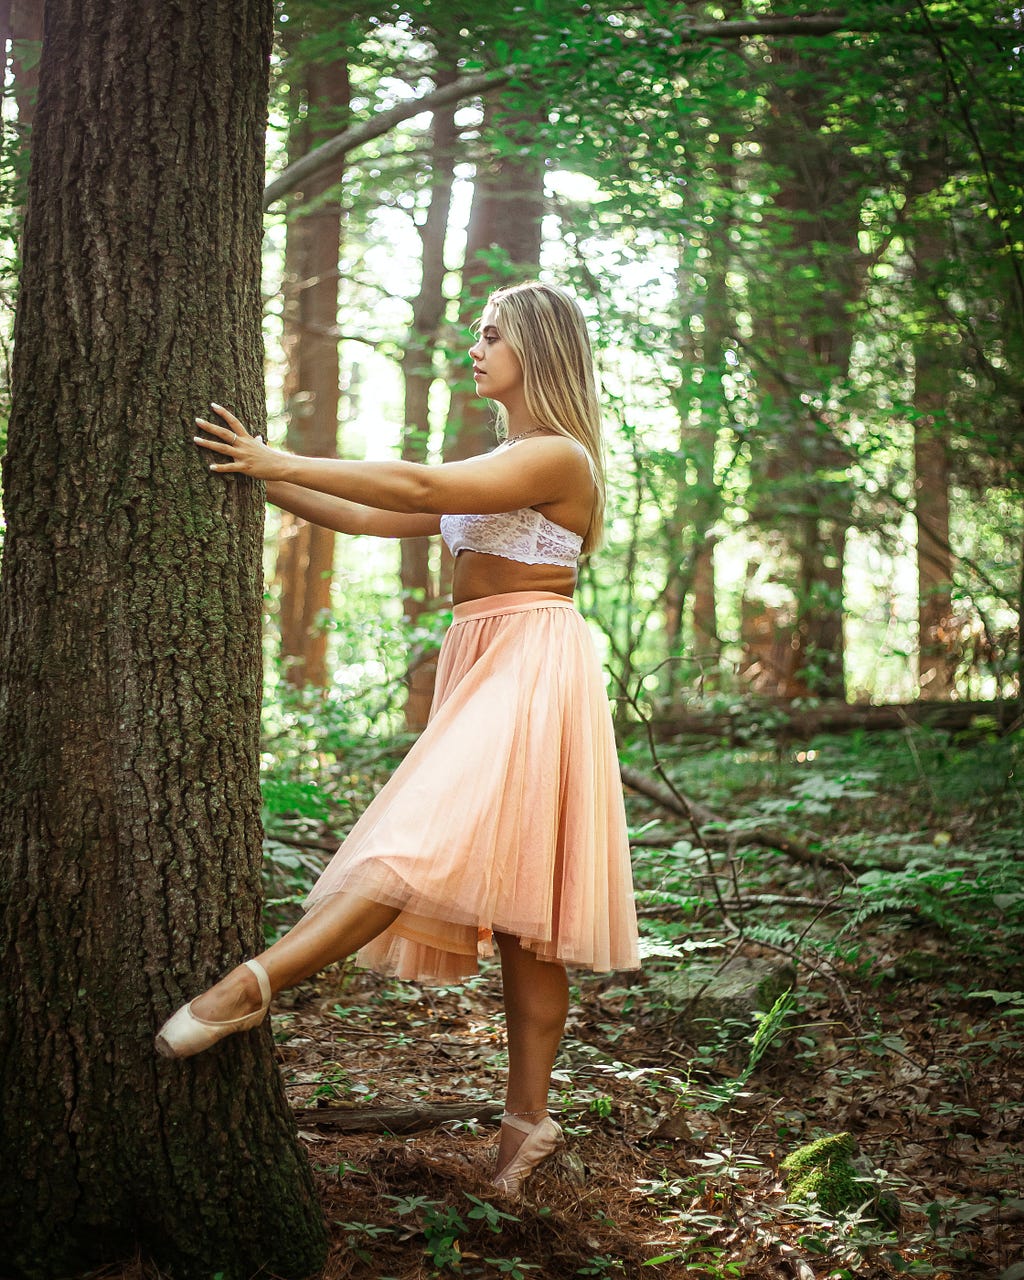 Bigger sized dancer, on pointe, holding onto a tree